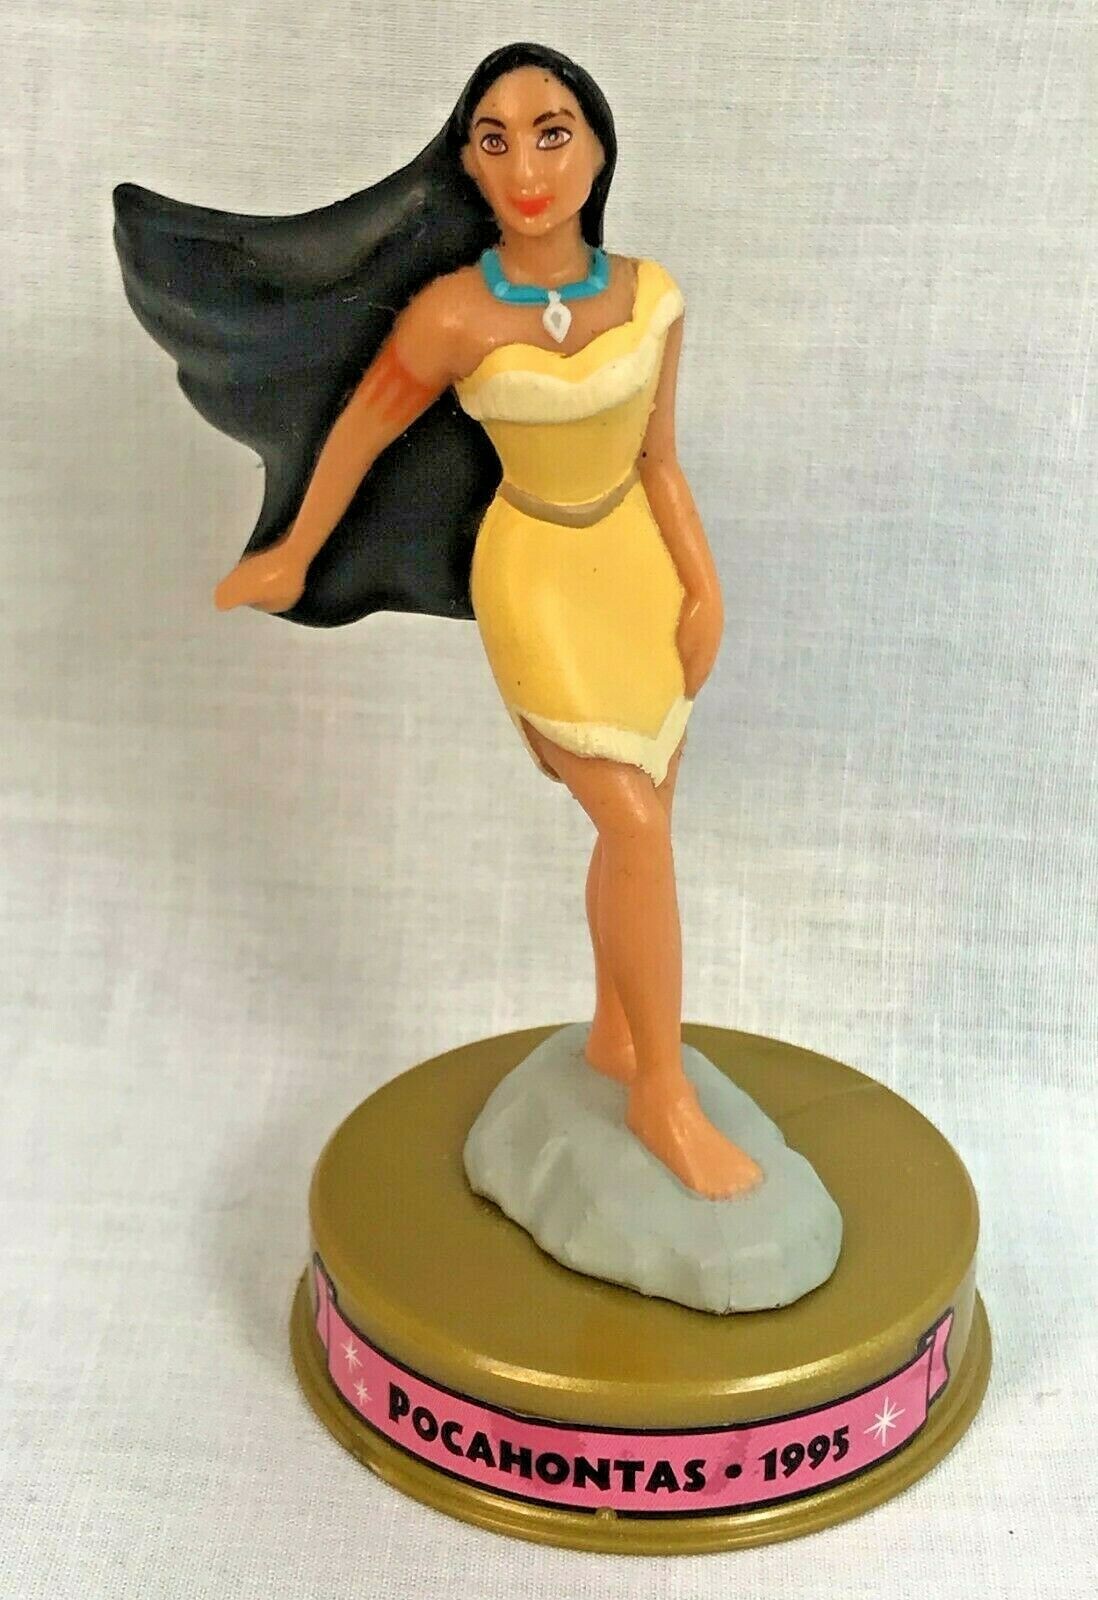 Disneys 100 Years Of Magic Mcdonalds Happy Meal Toy Pocahontas 1995 Figurine Other Contemp 